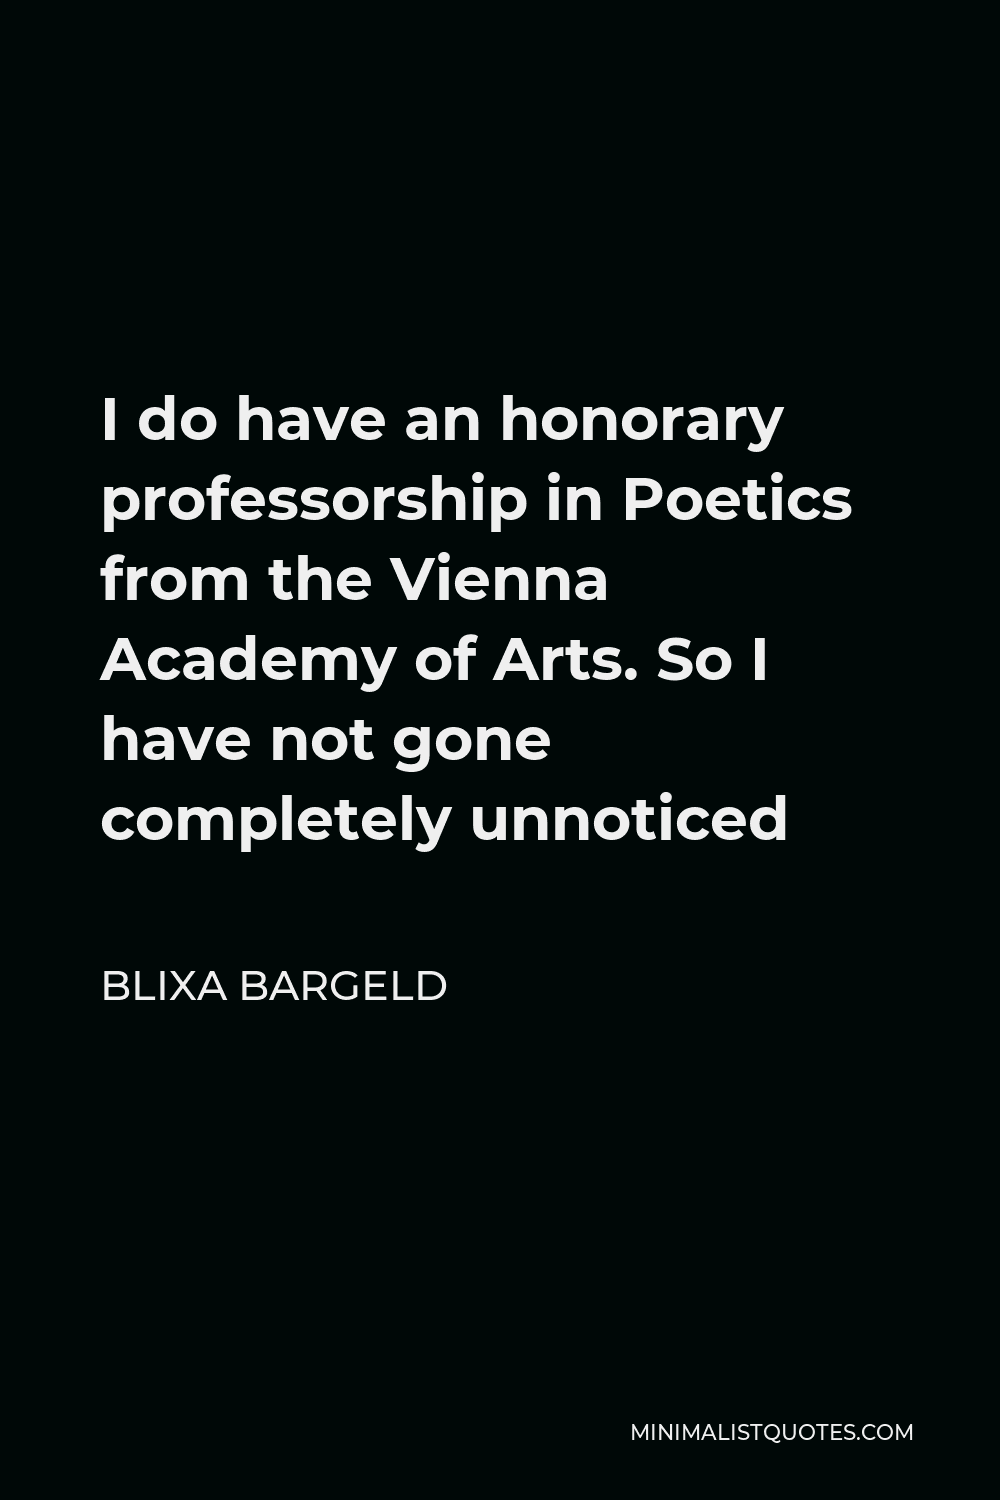 Blixa Bargeld Quote - I do have an honorary professorship in Poetics from the Vienna Academy of Arts. So I have not gone completely unnoticed